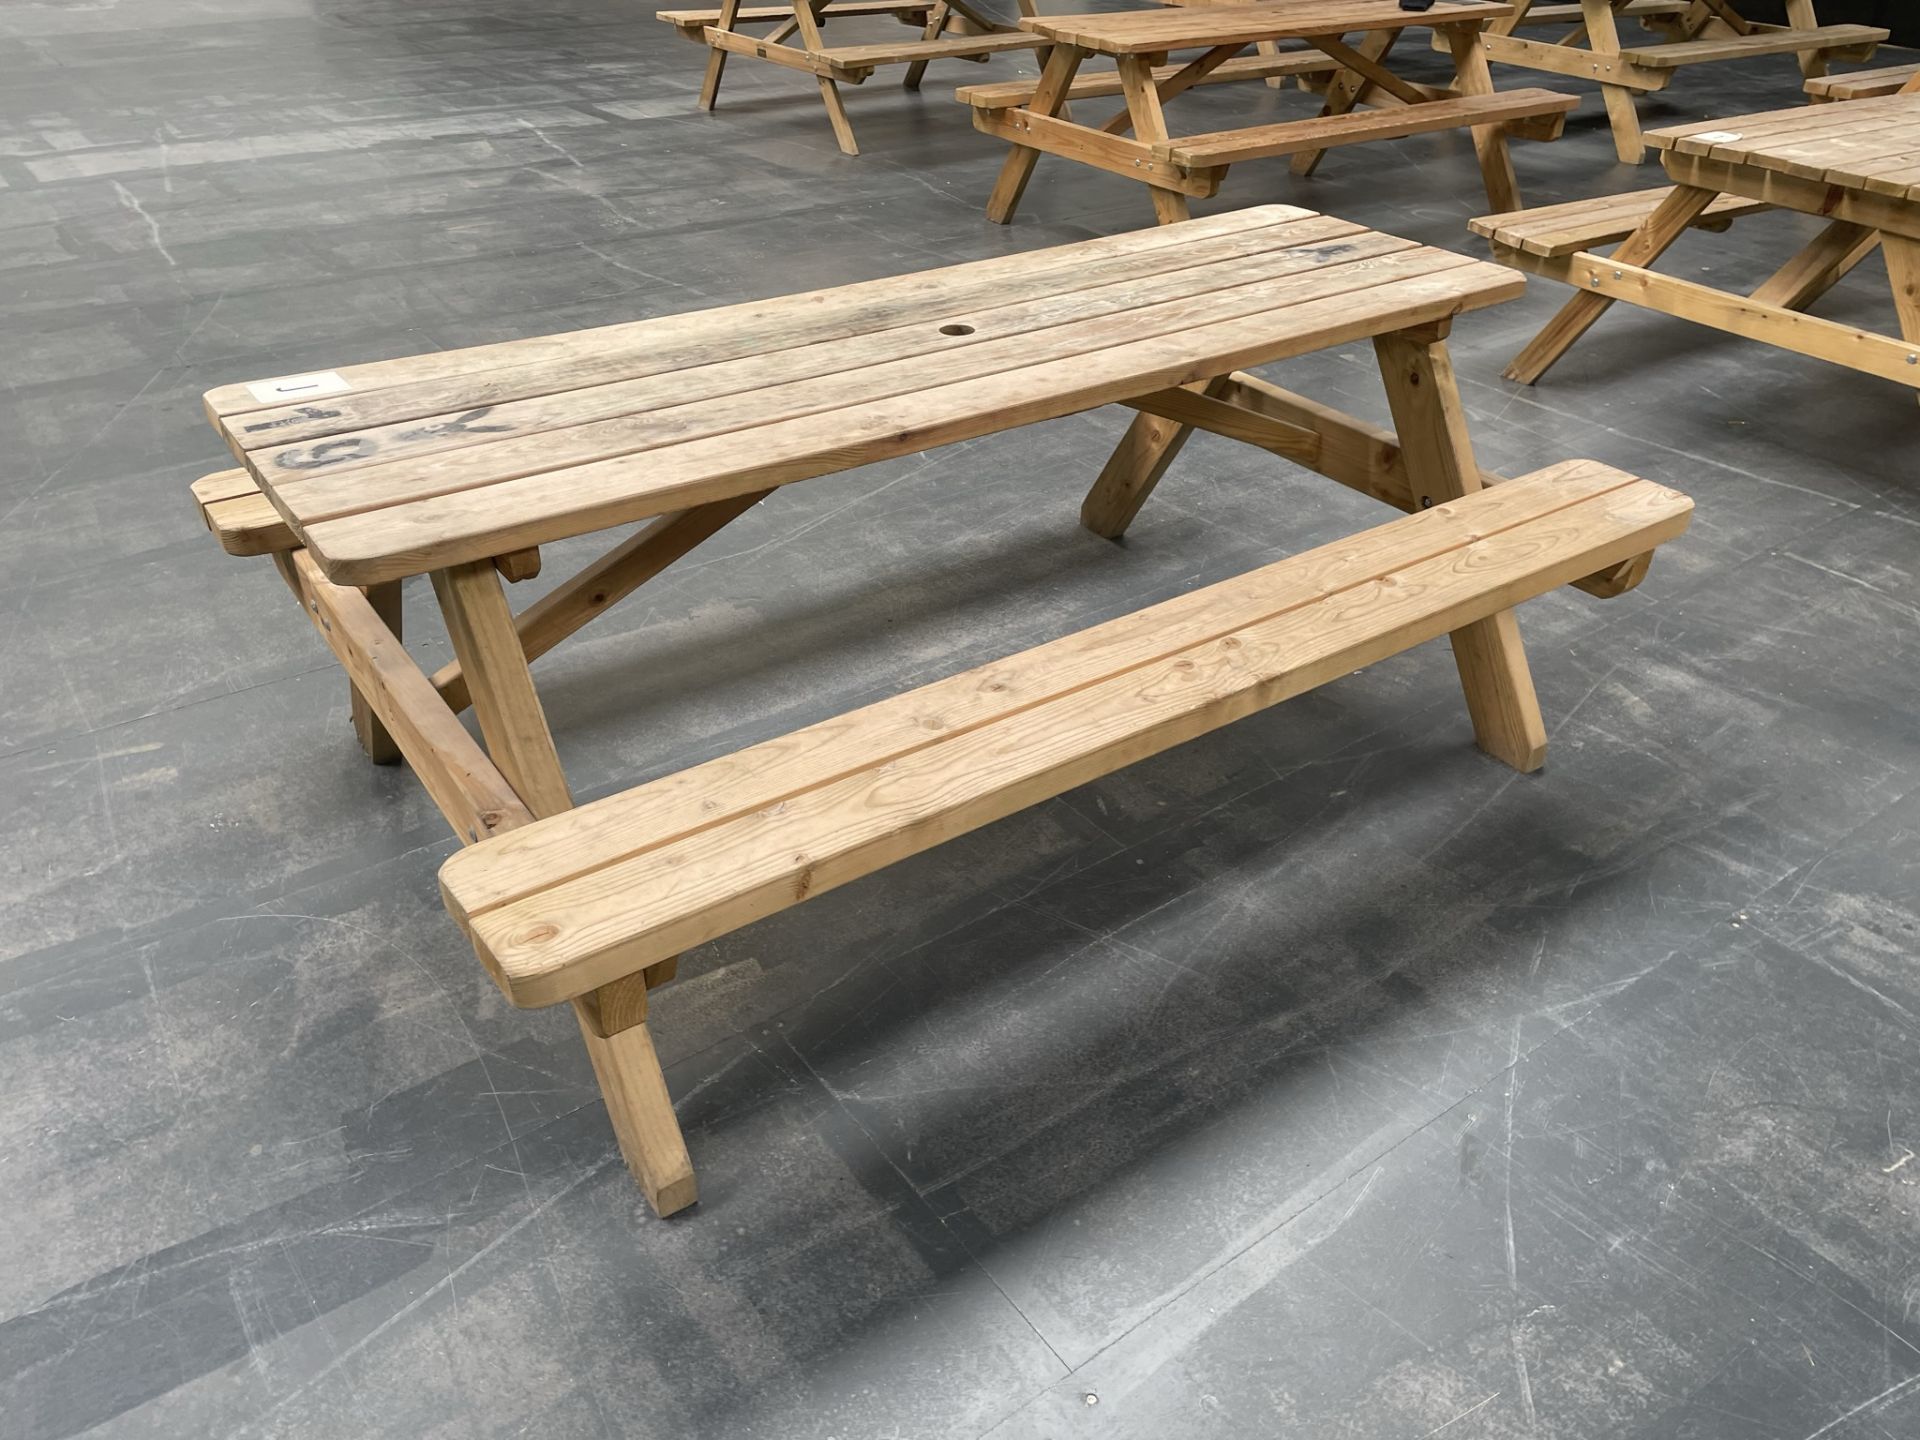 8 x Wooden Outdoor Picnic Benches - Image 2 of 2